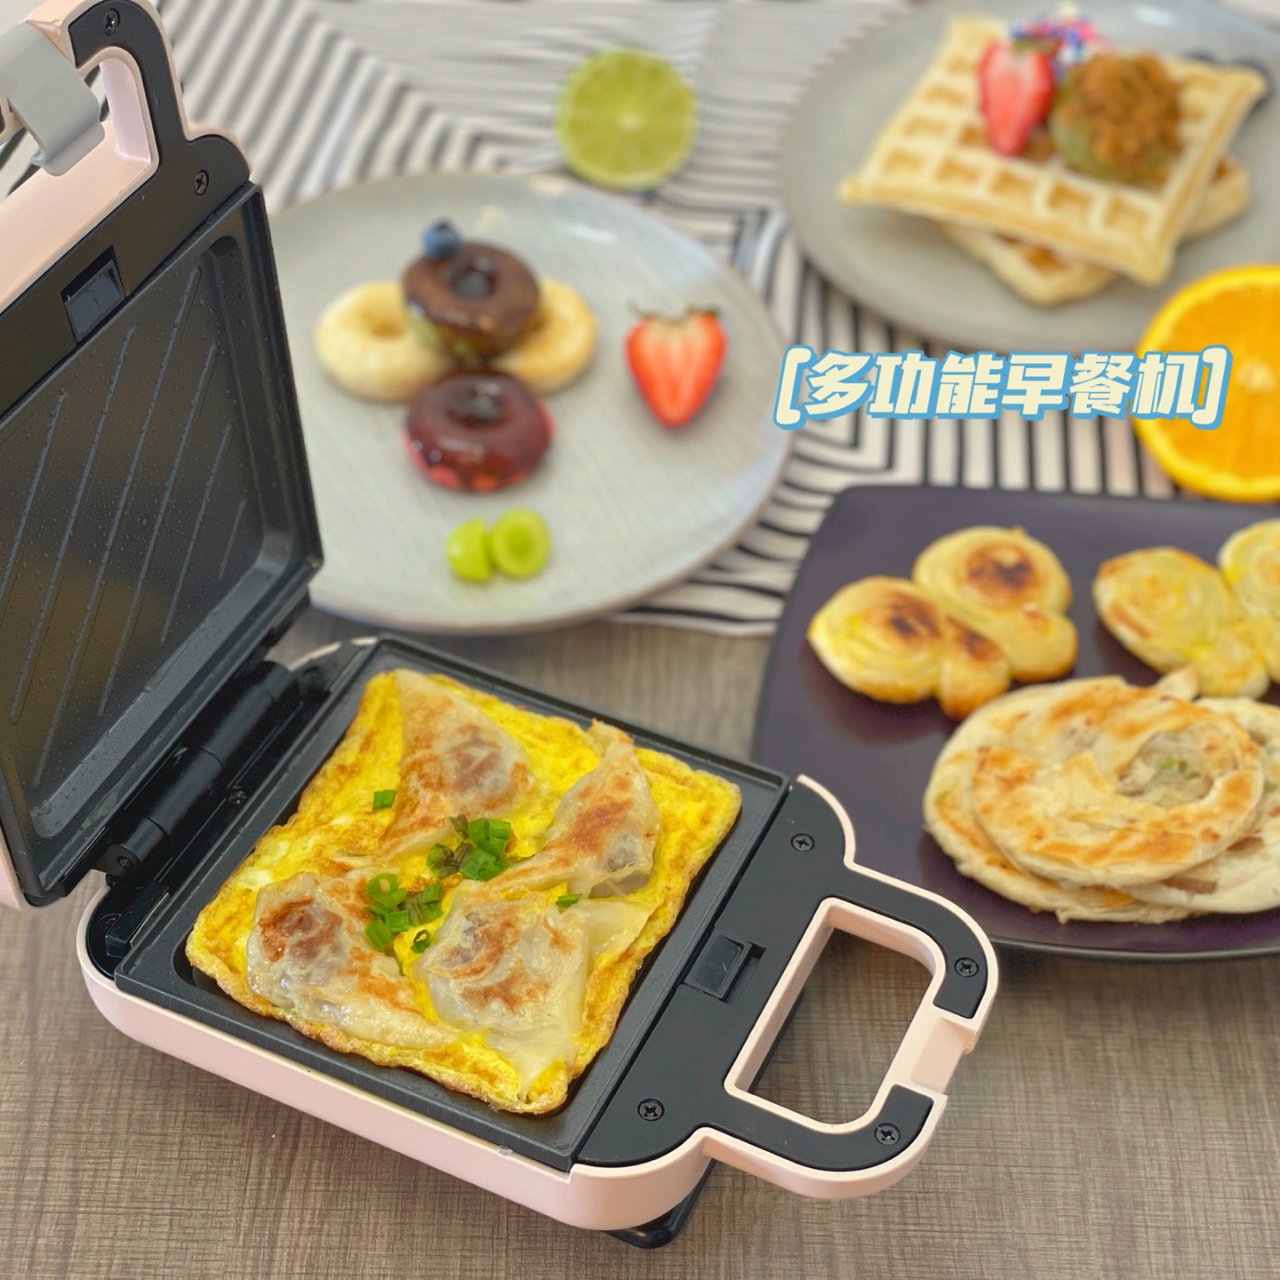 Liven Mini Waffle Maker, 3-in-1 Waffle Maker with Removable Non-Stick Plates, Compact Design, Easy to Clean, Perfect for individuals, On the Go Breakfast, Lunch, Snack, Pink: Kitchen & Dining